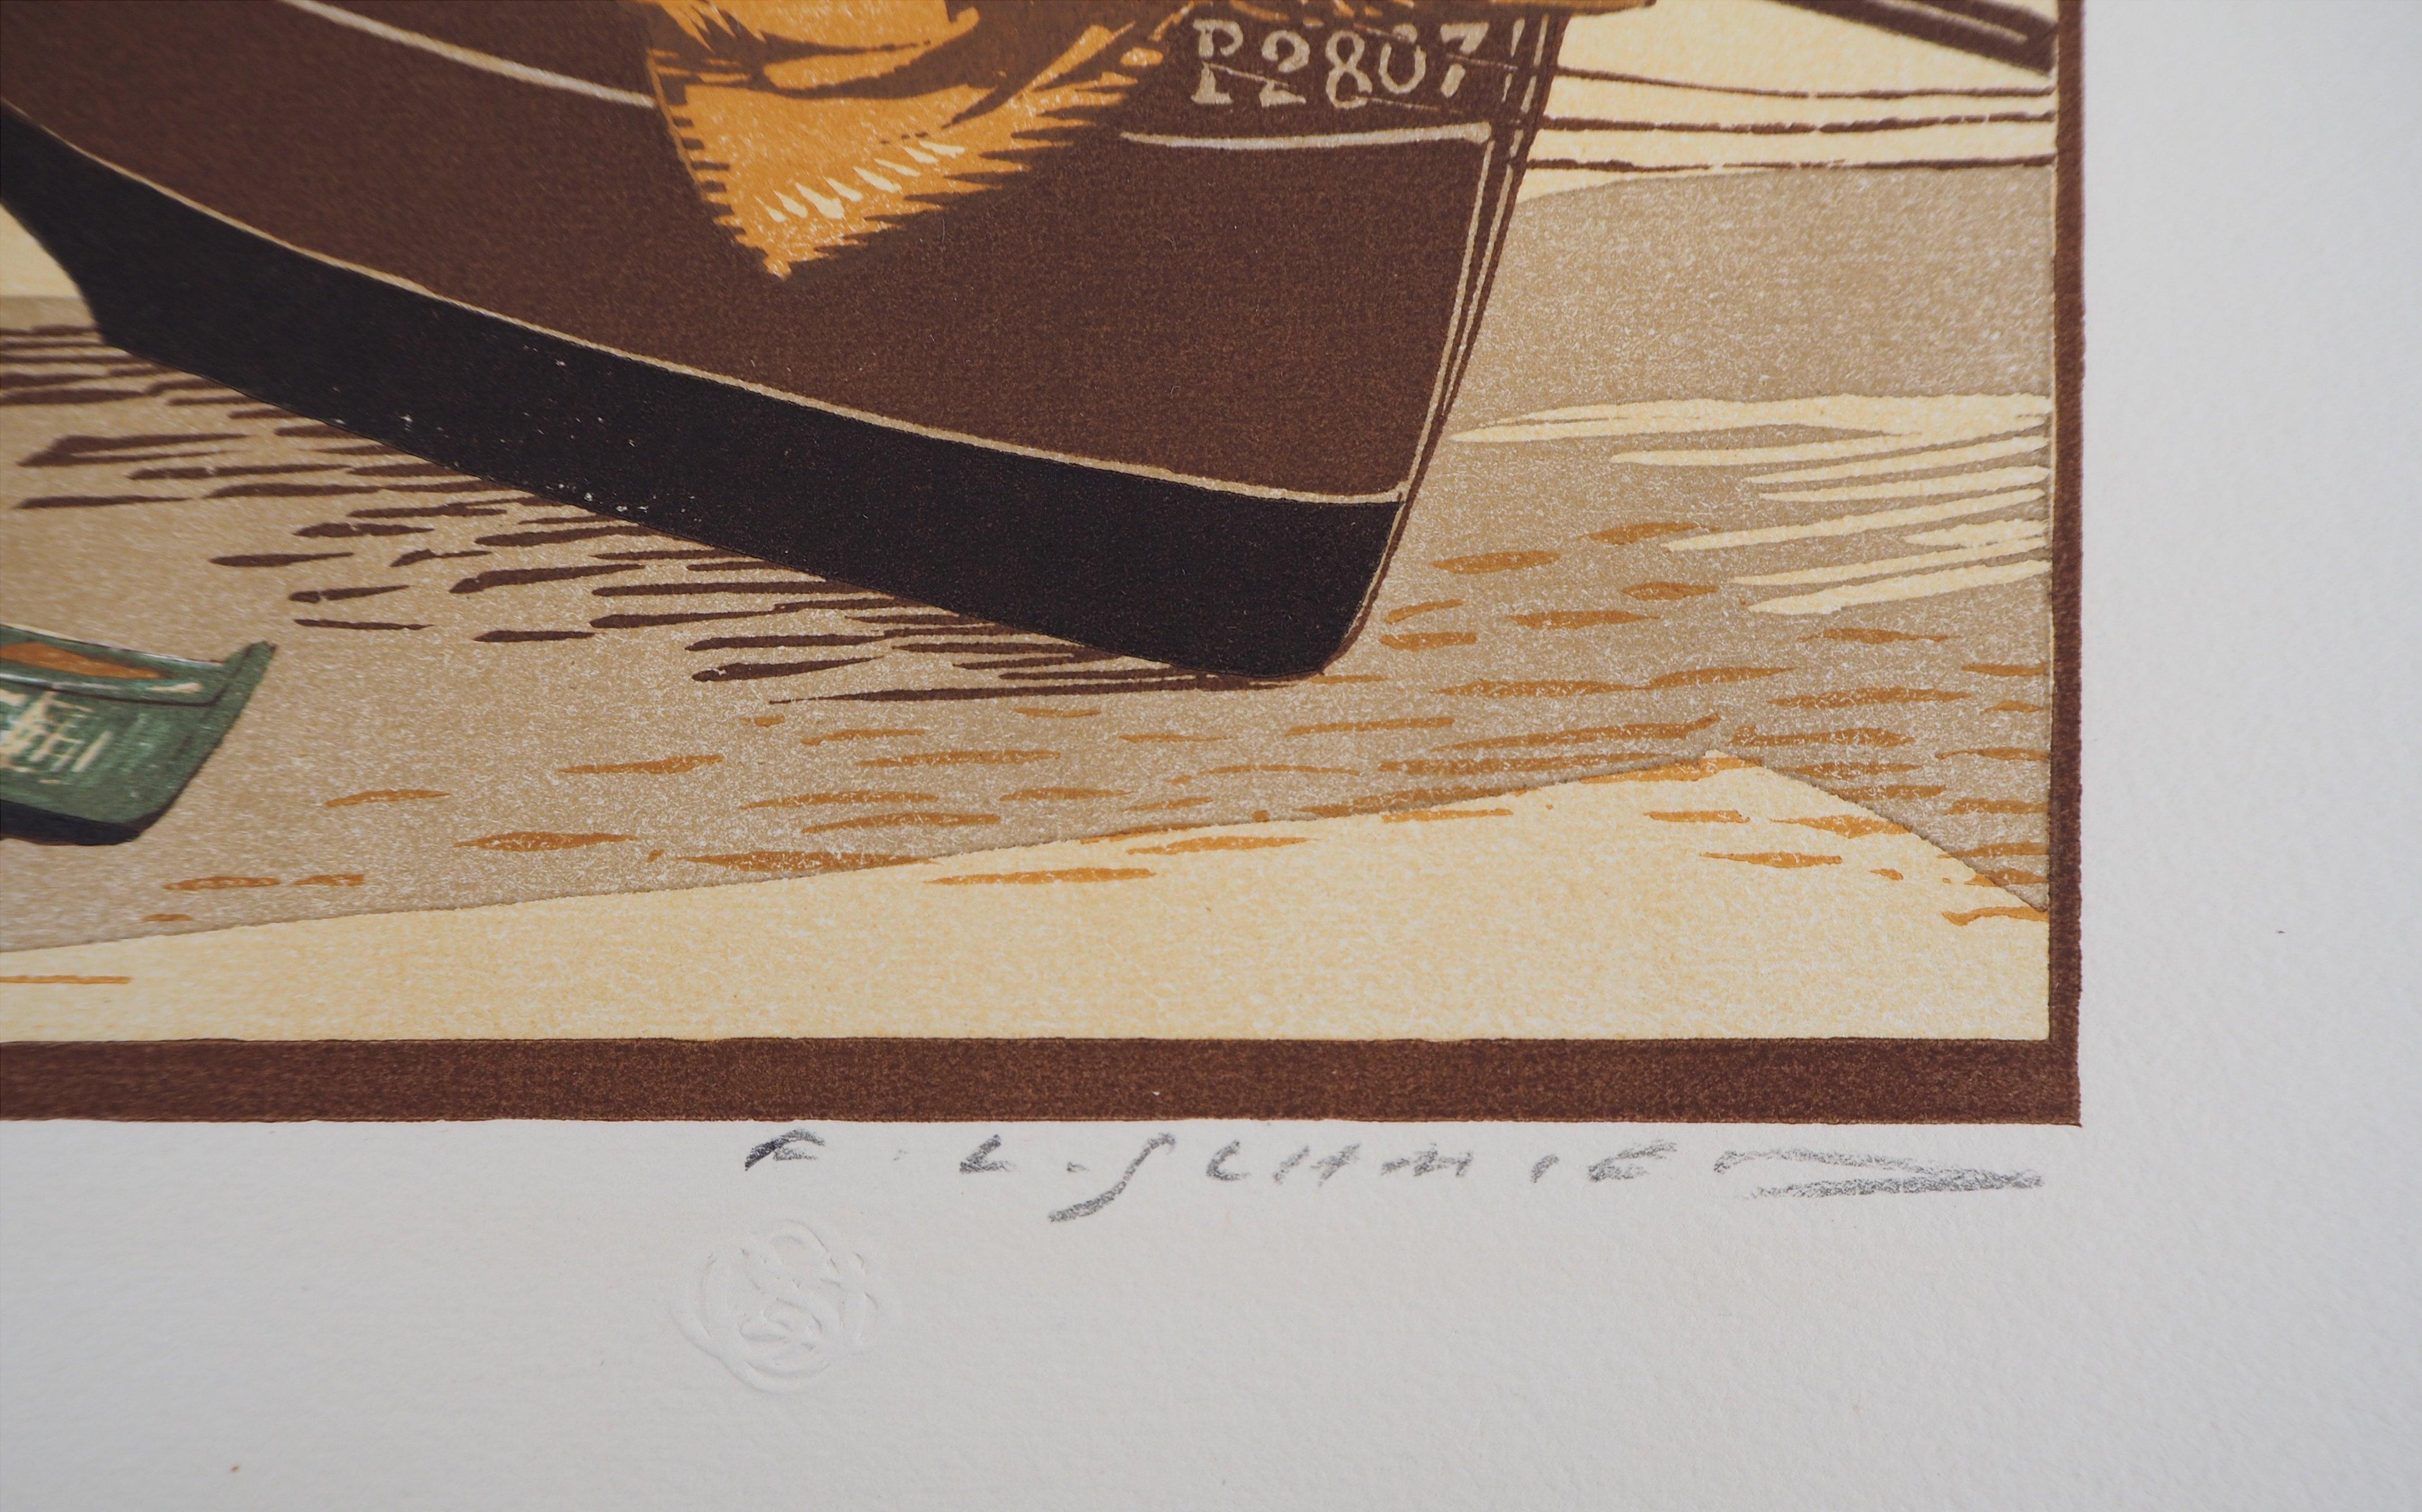 François Louis SCHMIED
Lobster Boat On The Shore, 1924

Original woodcut
Handsigned in pencil
Numbered /160
On vellum 32,5 x 25,5 cm (c. 12,7 x 10 in)

Edited for the 'Imagier de la Gravure sur Bois' (5th year) and bears the blind stamp of the